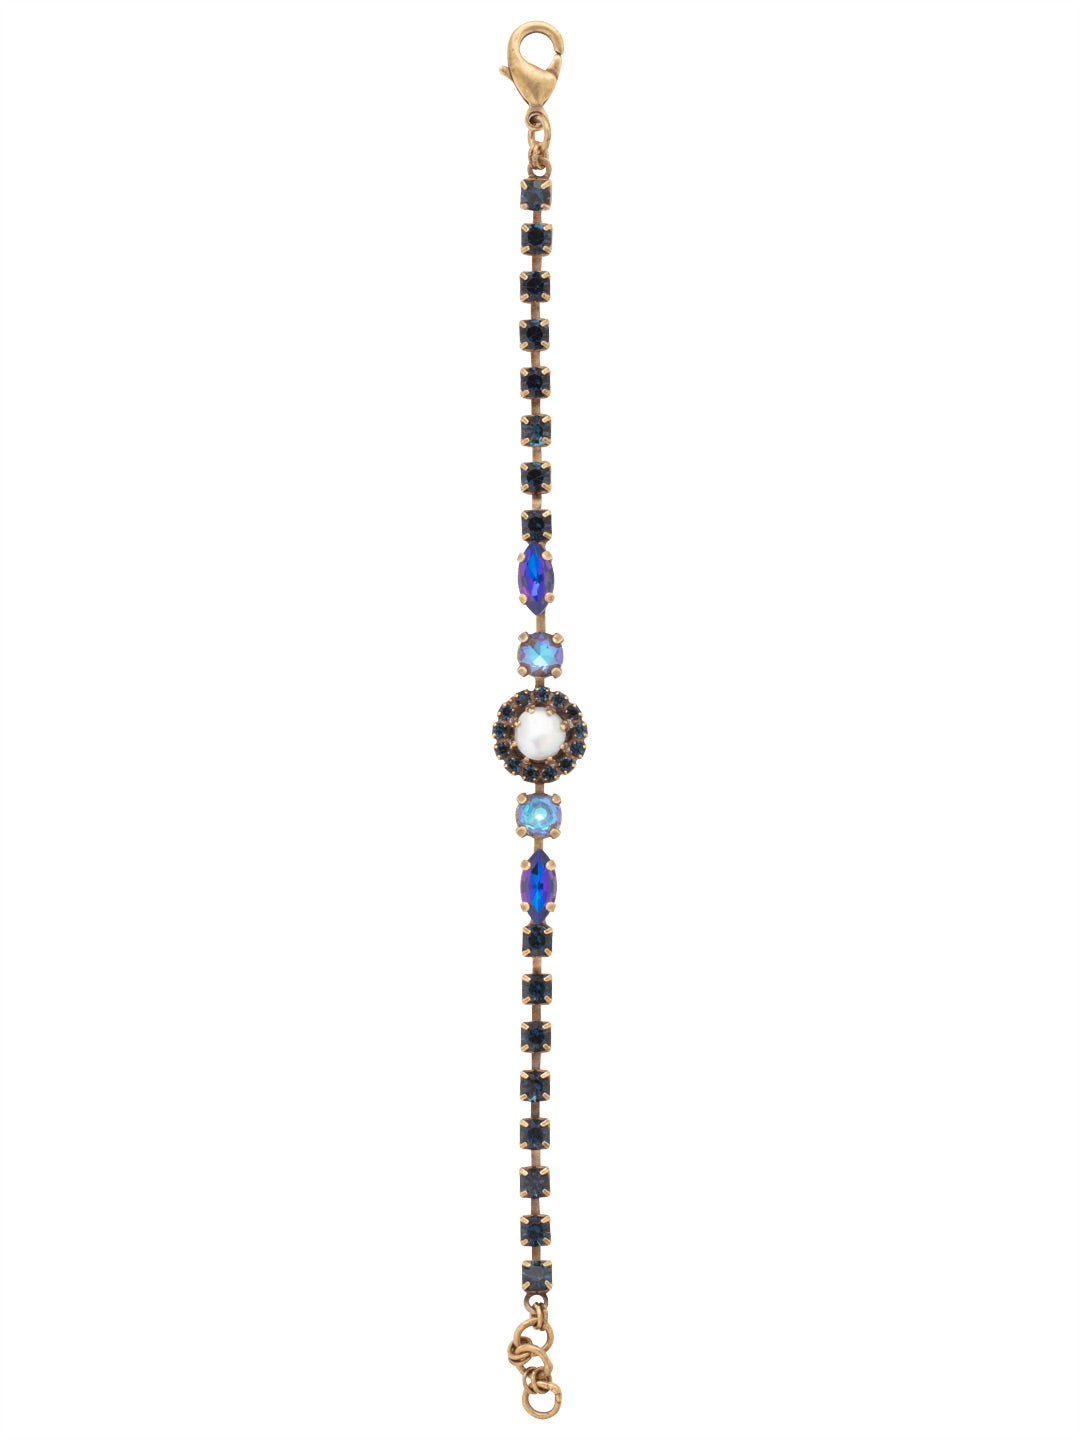 Shoshanna Single Halo Tennis Bracelet - BFC30AGVBN - <p>The Shoshanna Tennis Bracelet features a crystal studded adjustable chain with round and baguette crystals connecting to a halo set freshwater pearl in the center, secured with a lobster claw clasp. From Sorrelli's Venice Blue collection in our Antique Gold-tone finish.</p>